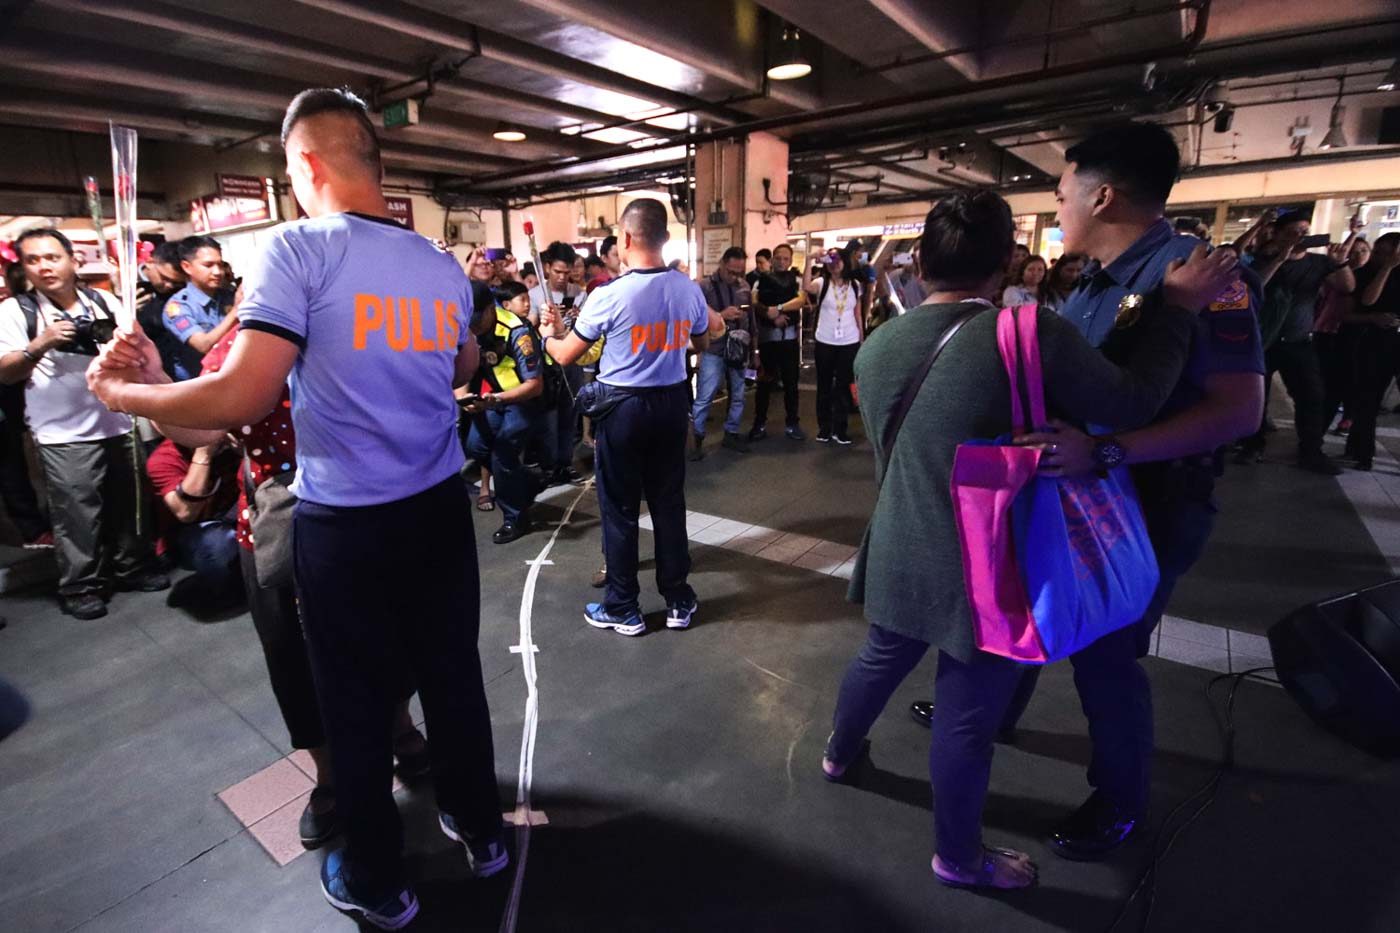 IN PHOTOS: Commuters get surprise from PNP on Valentine’s Day